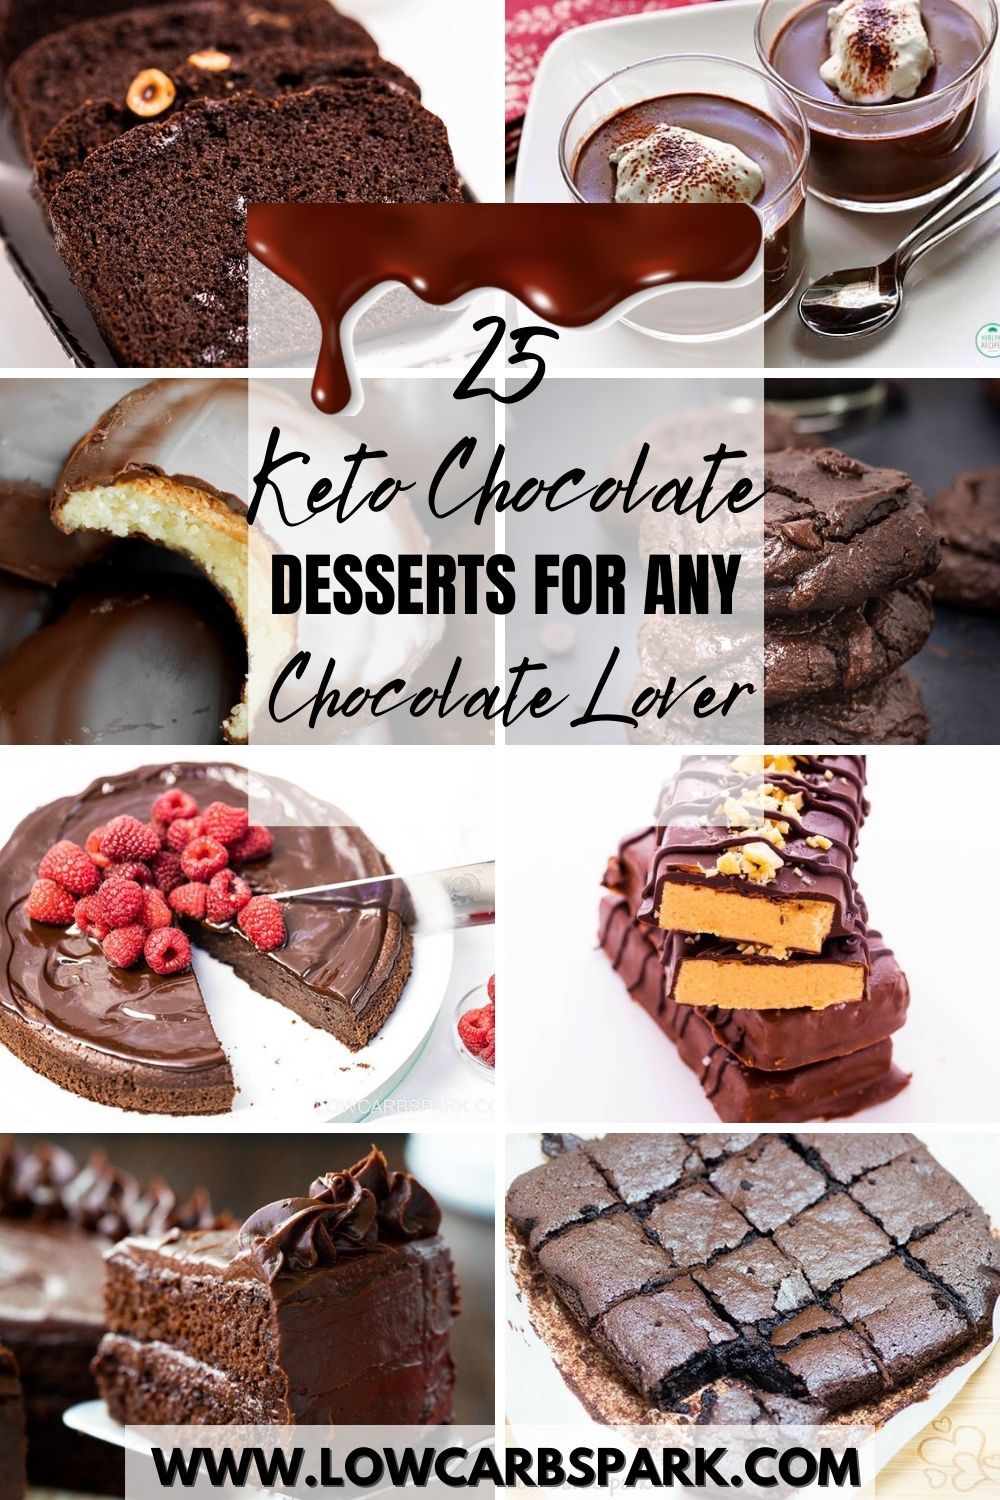 25 Keto Chocolate Desserts for any Chocolate Lover